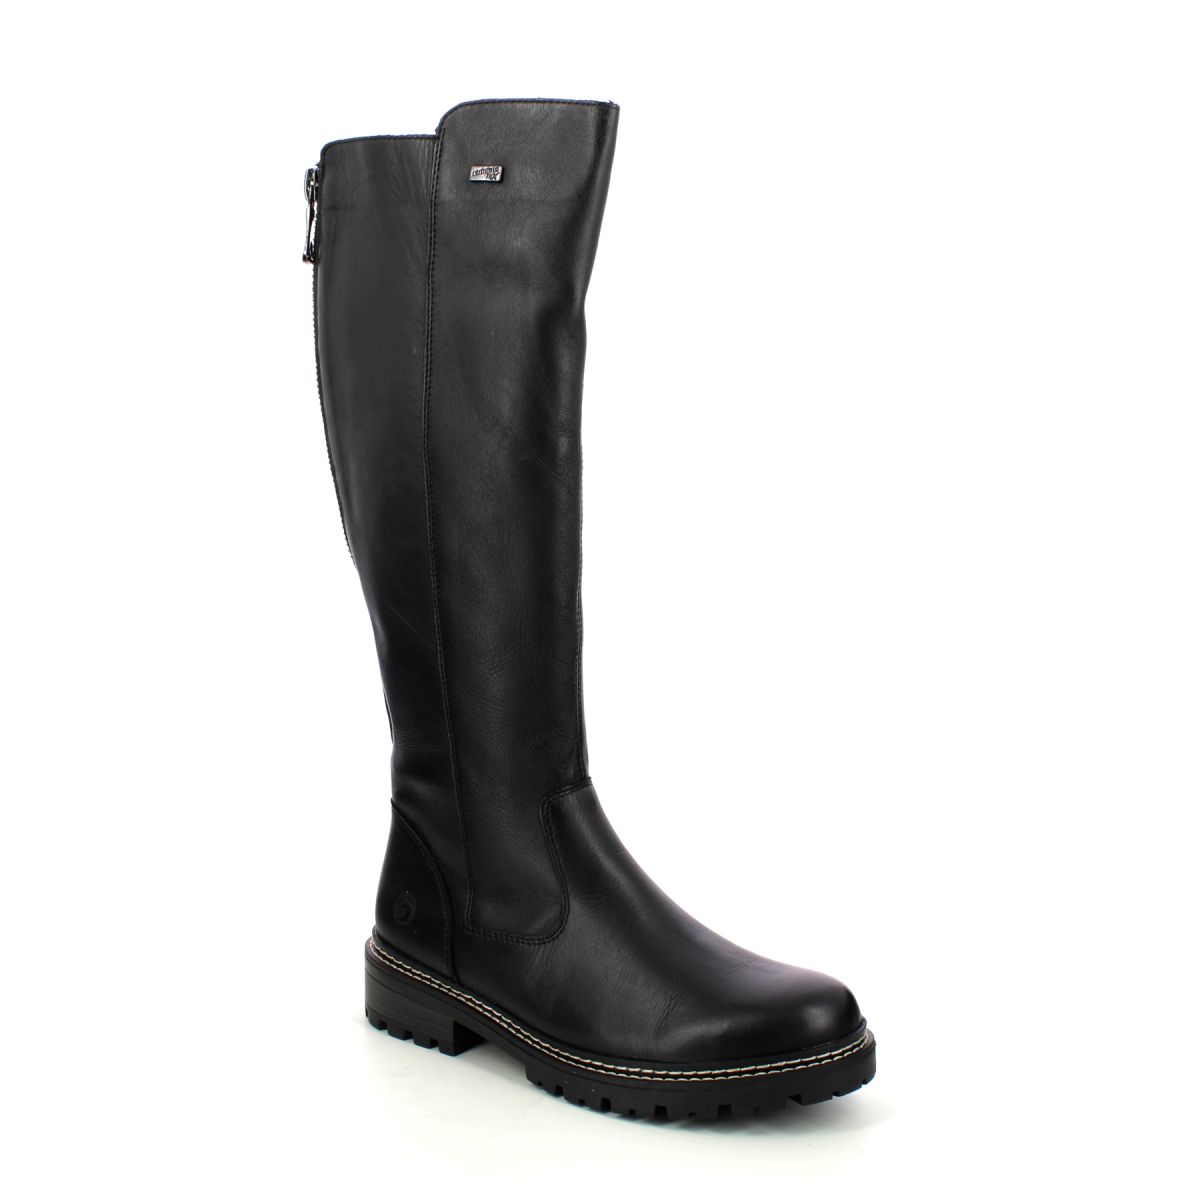 Remonte Astralong Tex Black Leather Womens Knee-High Boots D0B72-01 In Size 40 In Plain Black Leather